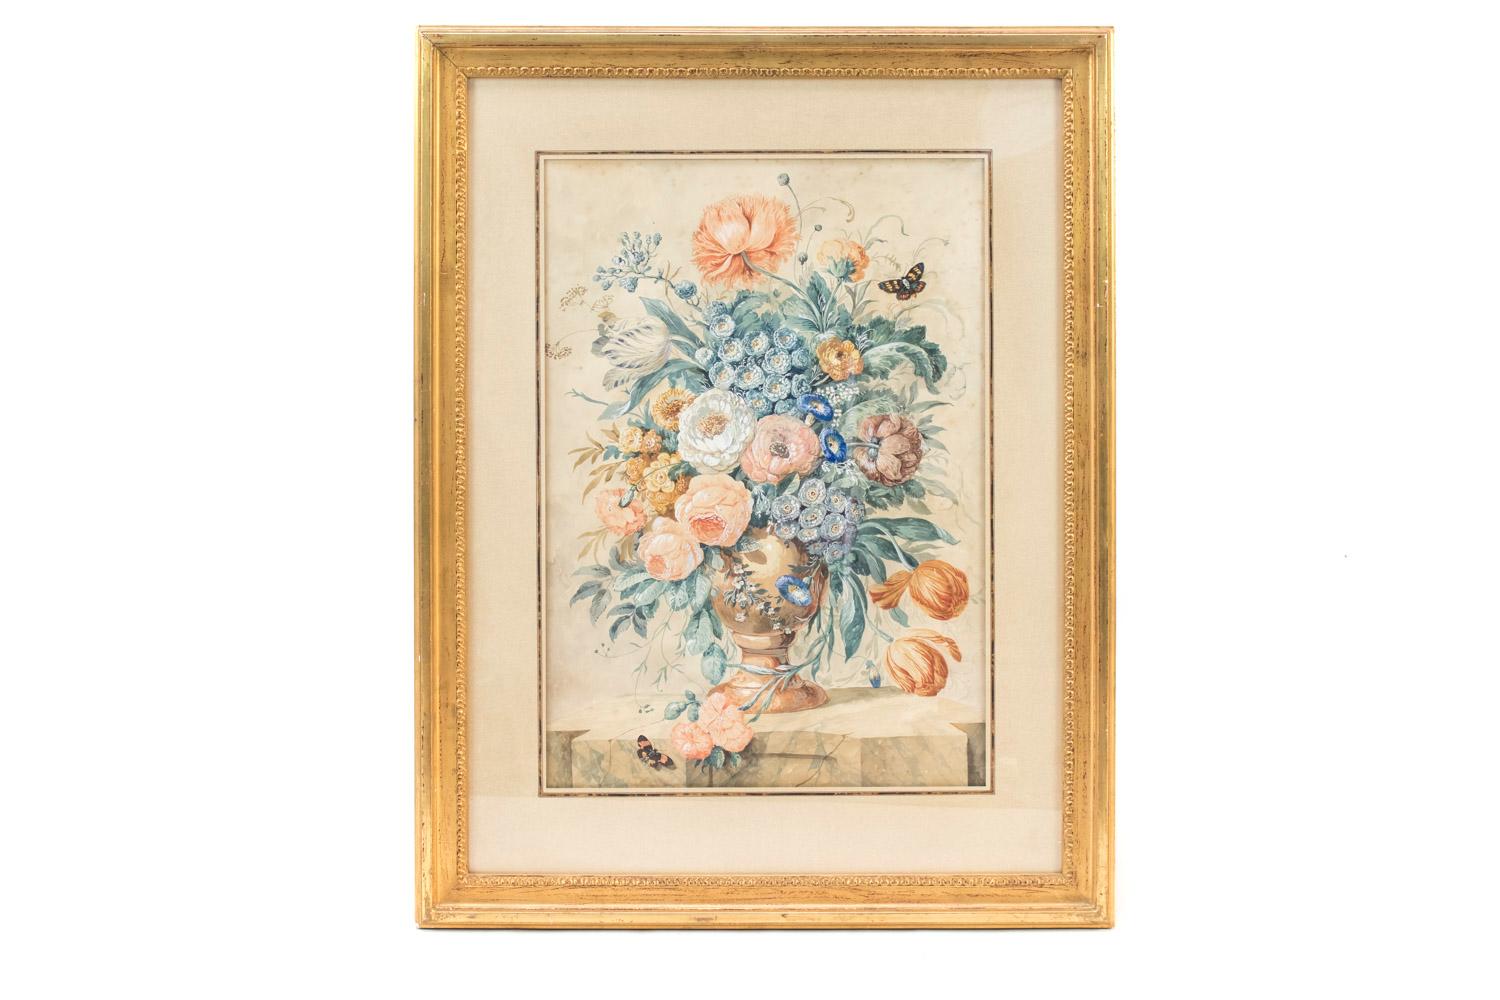 Pair of framed gouaches on papier representing each one a flowers basket in vase put on marble support and composed of peonies, dahlias, eyelets, tulips, periwinkles, forget-me-not, etc, in the style of Dutch still life from the 17th century. Two